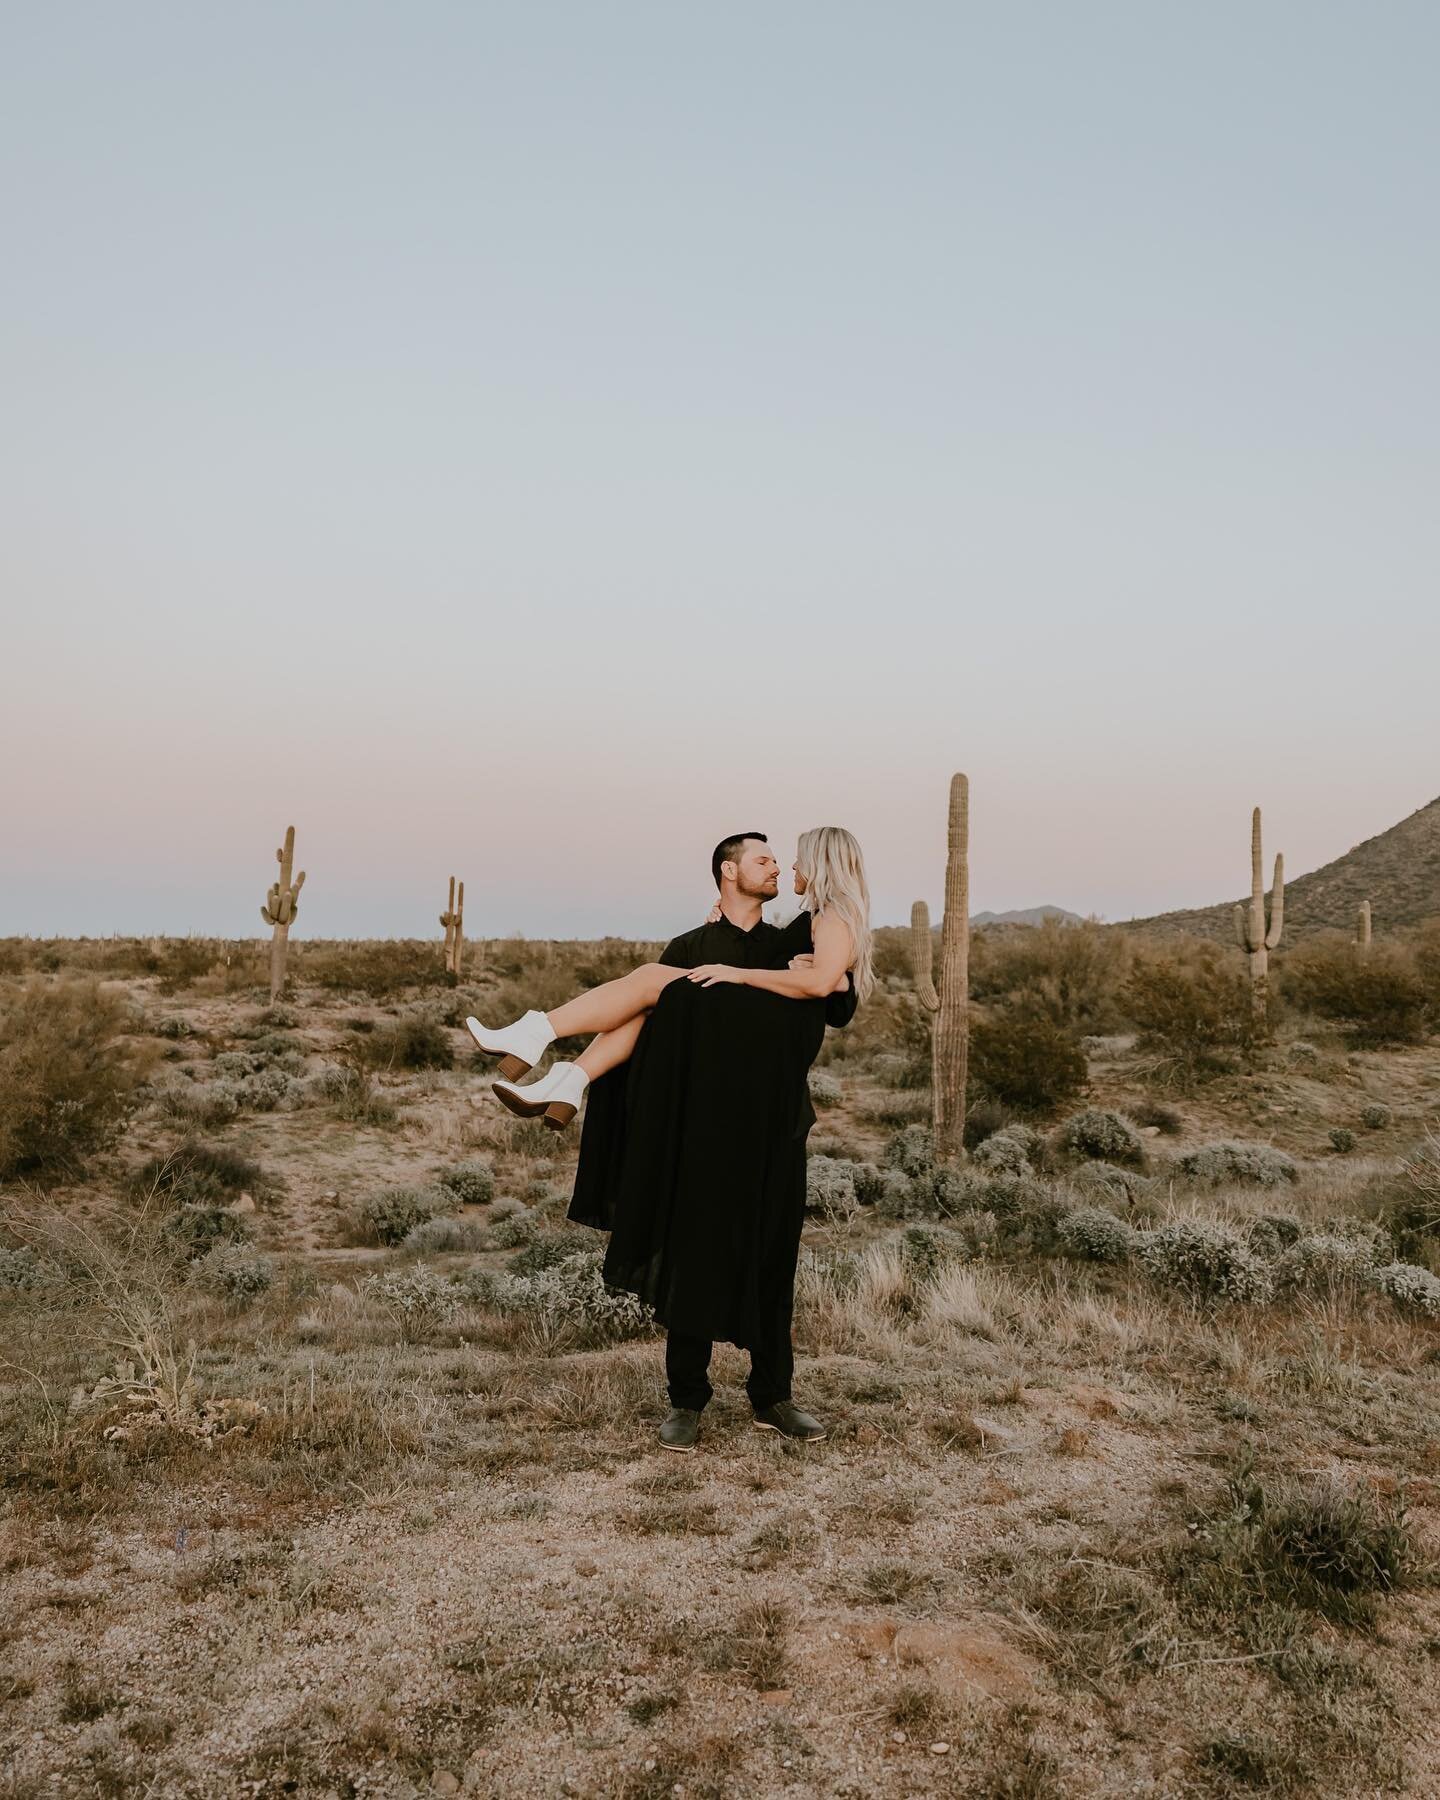 I will forever be in love with the desert and these photos!

&bull;
&bull;
&bull;
#arizonaphotographer #azphotographer #mesaphotographer #couplesphotography #couplesphotographysession #azcouplesphotographer #azportraitphotographer #phoenixphotographe